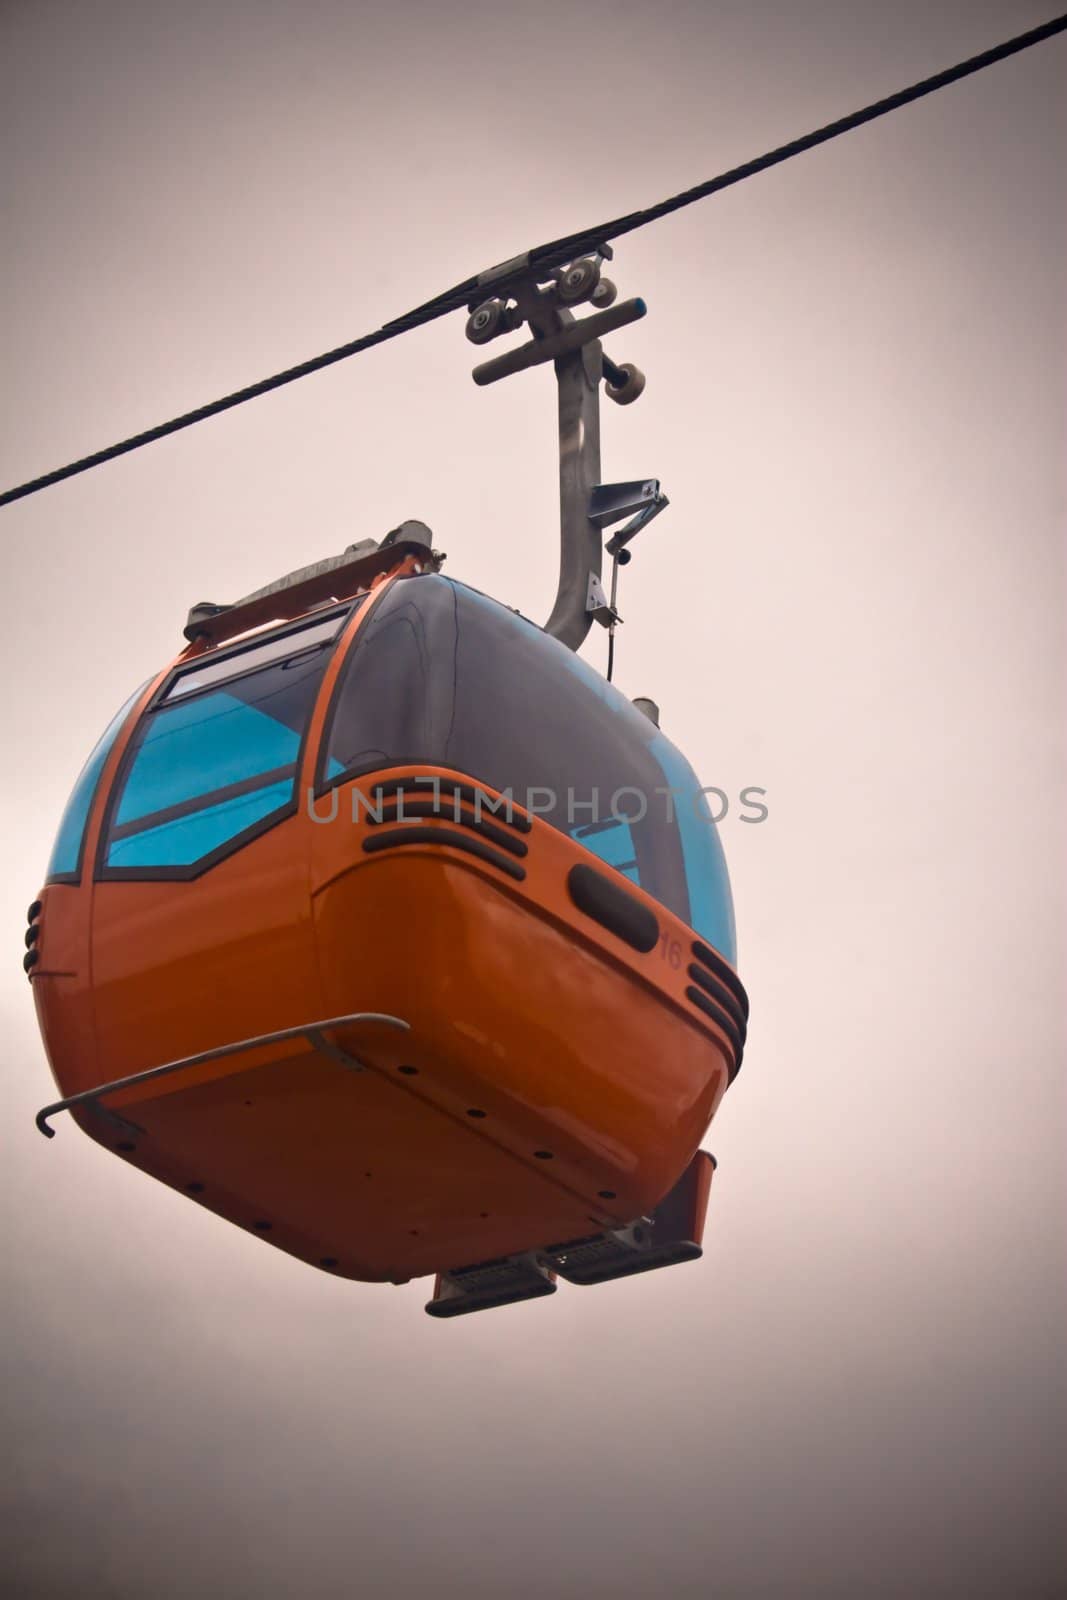 New orange mountain gondola suspended from wire against white sky with vignette